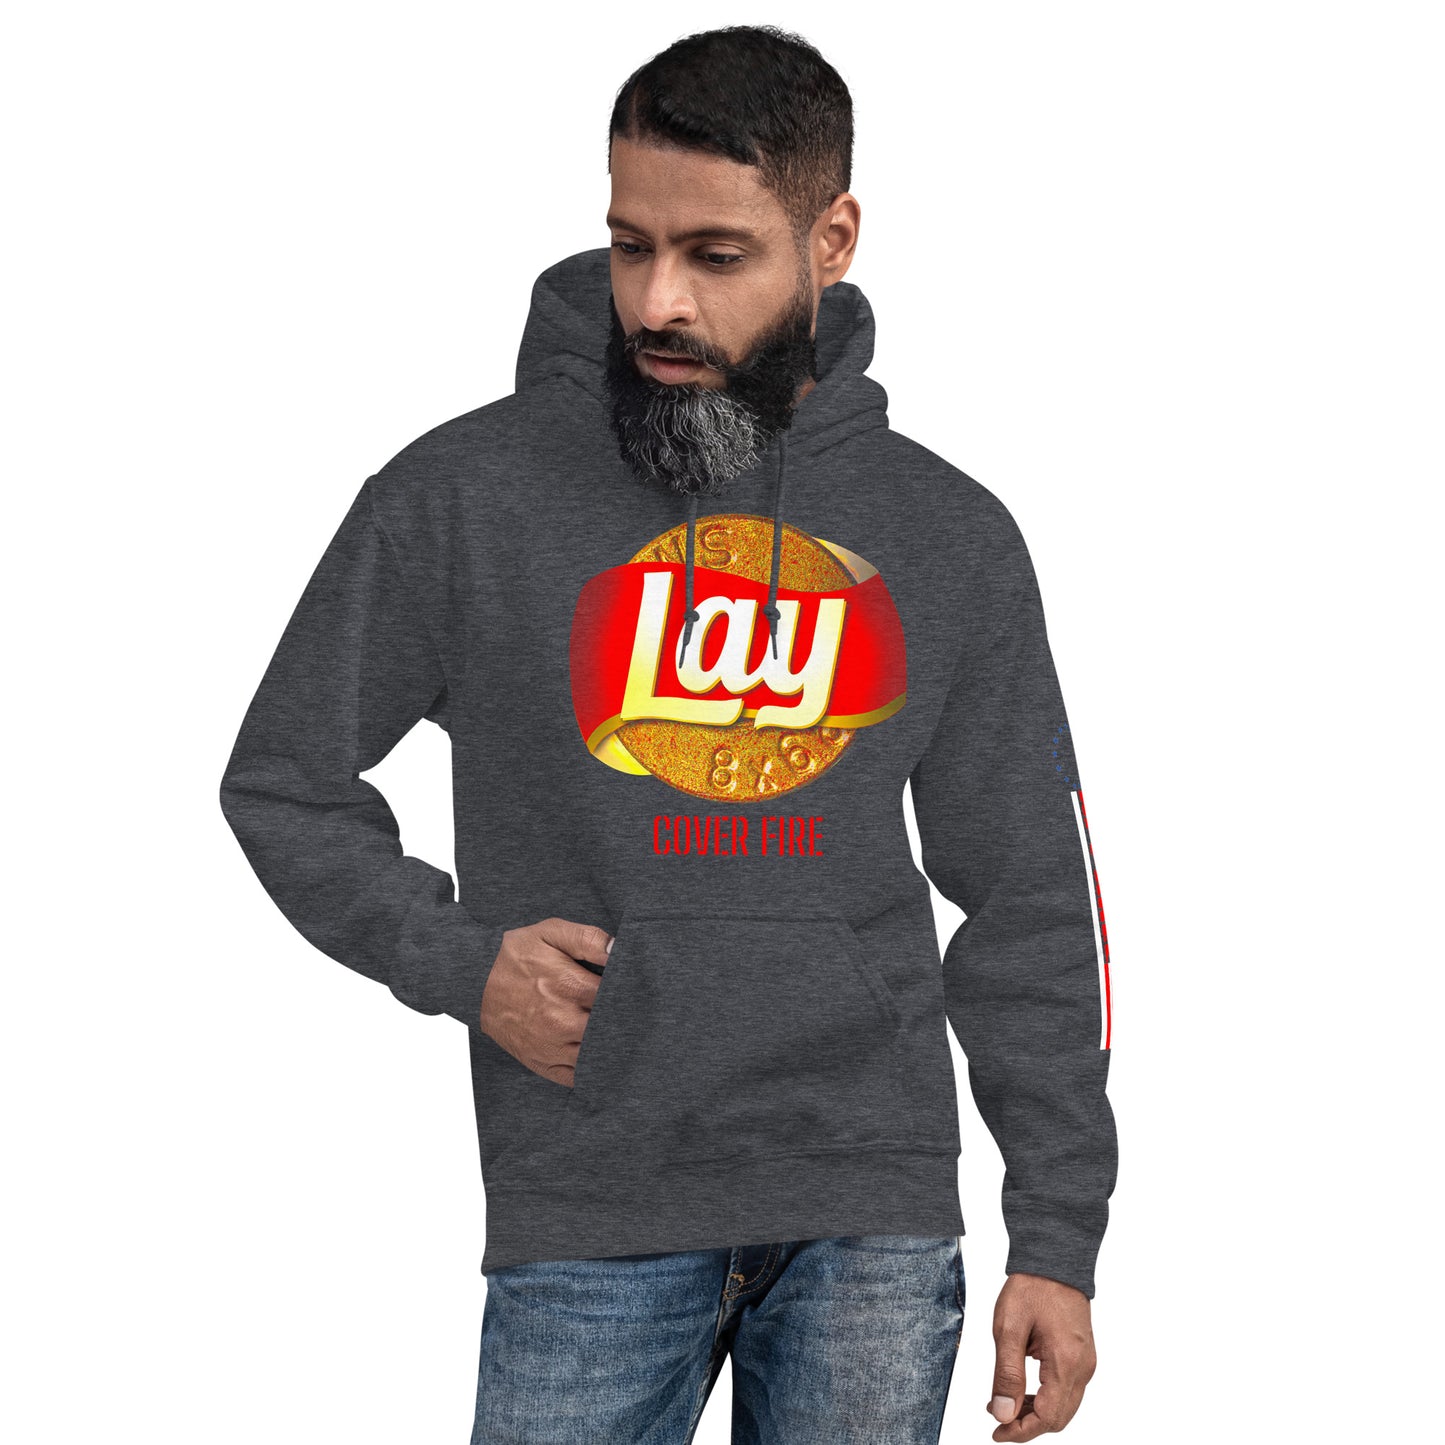 Lay Cover-Fire Unisex Hoodie